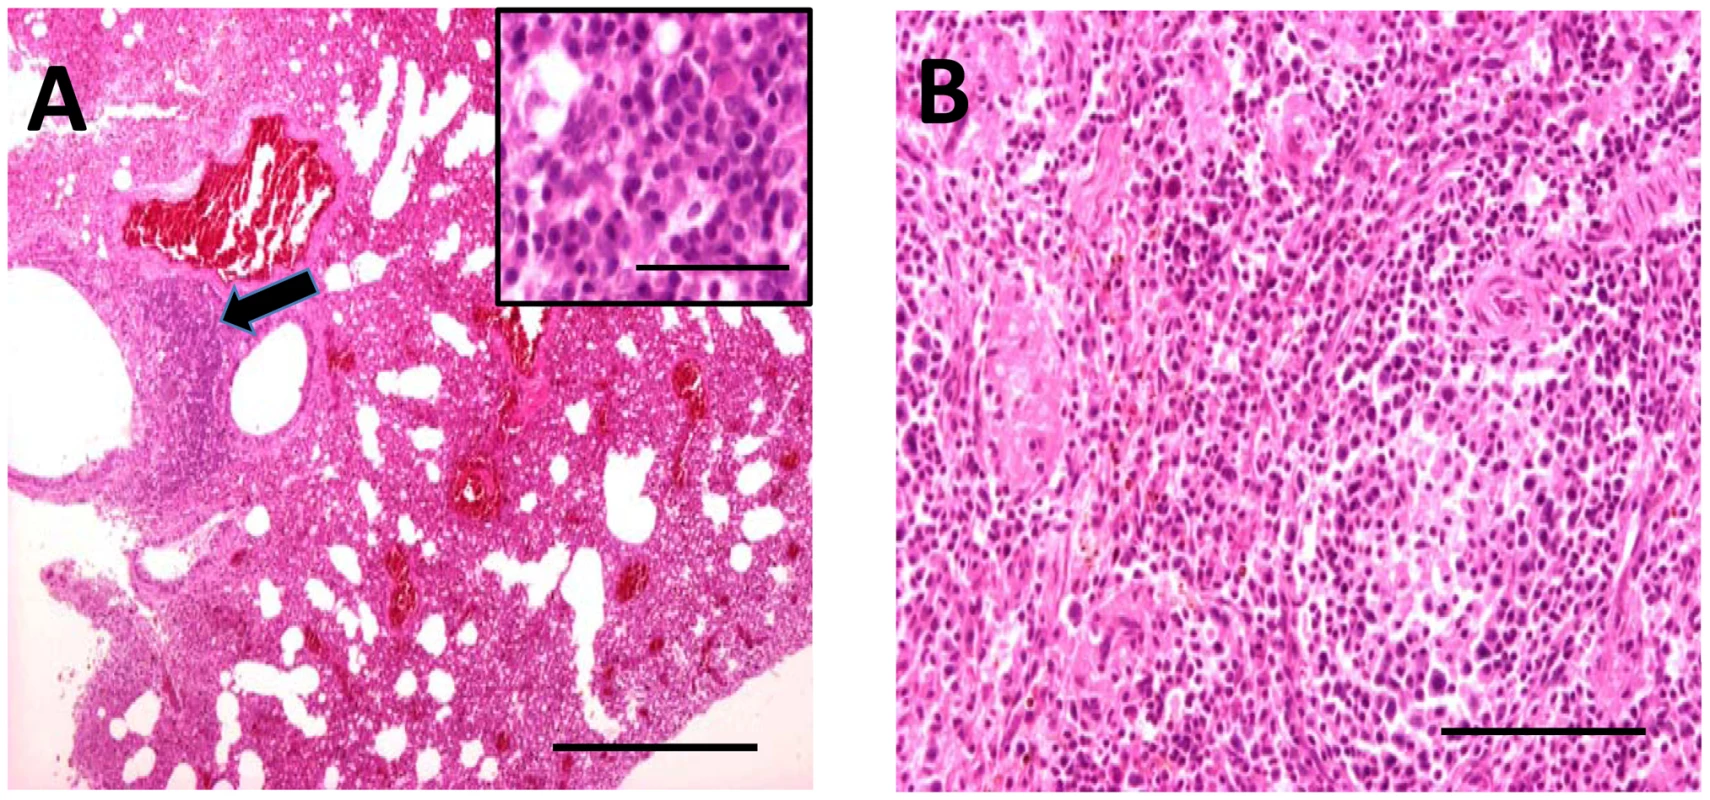 Hematoxylin and eosin stained sections through lung (A) and spleen (B) of infected <i>M. schreibersii</i>.